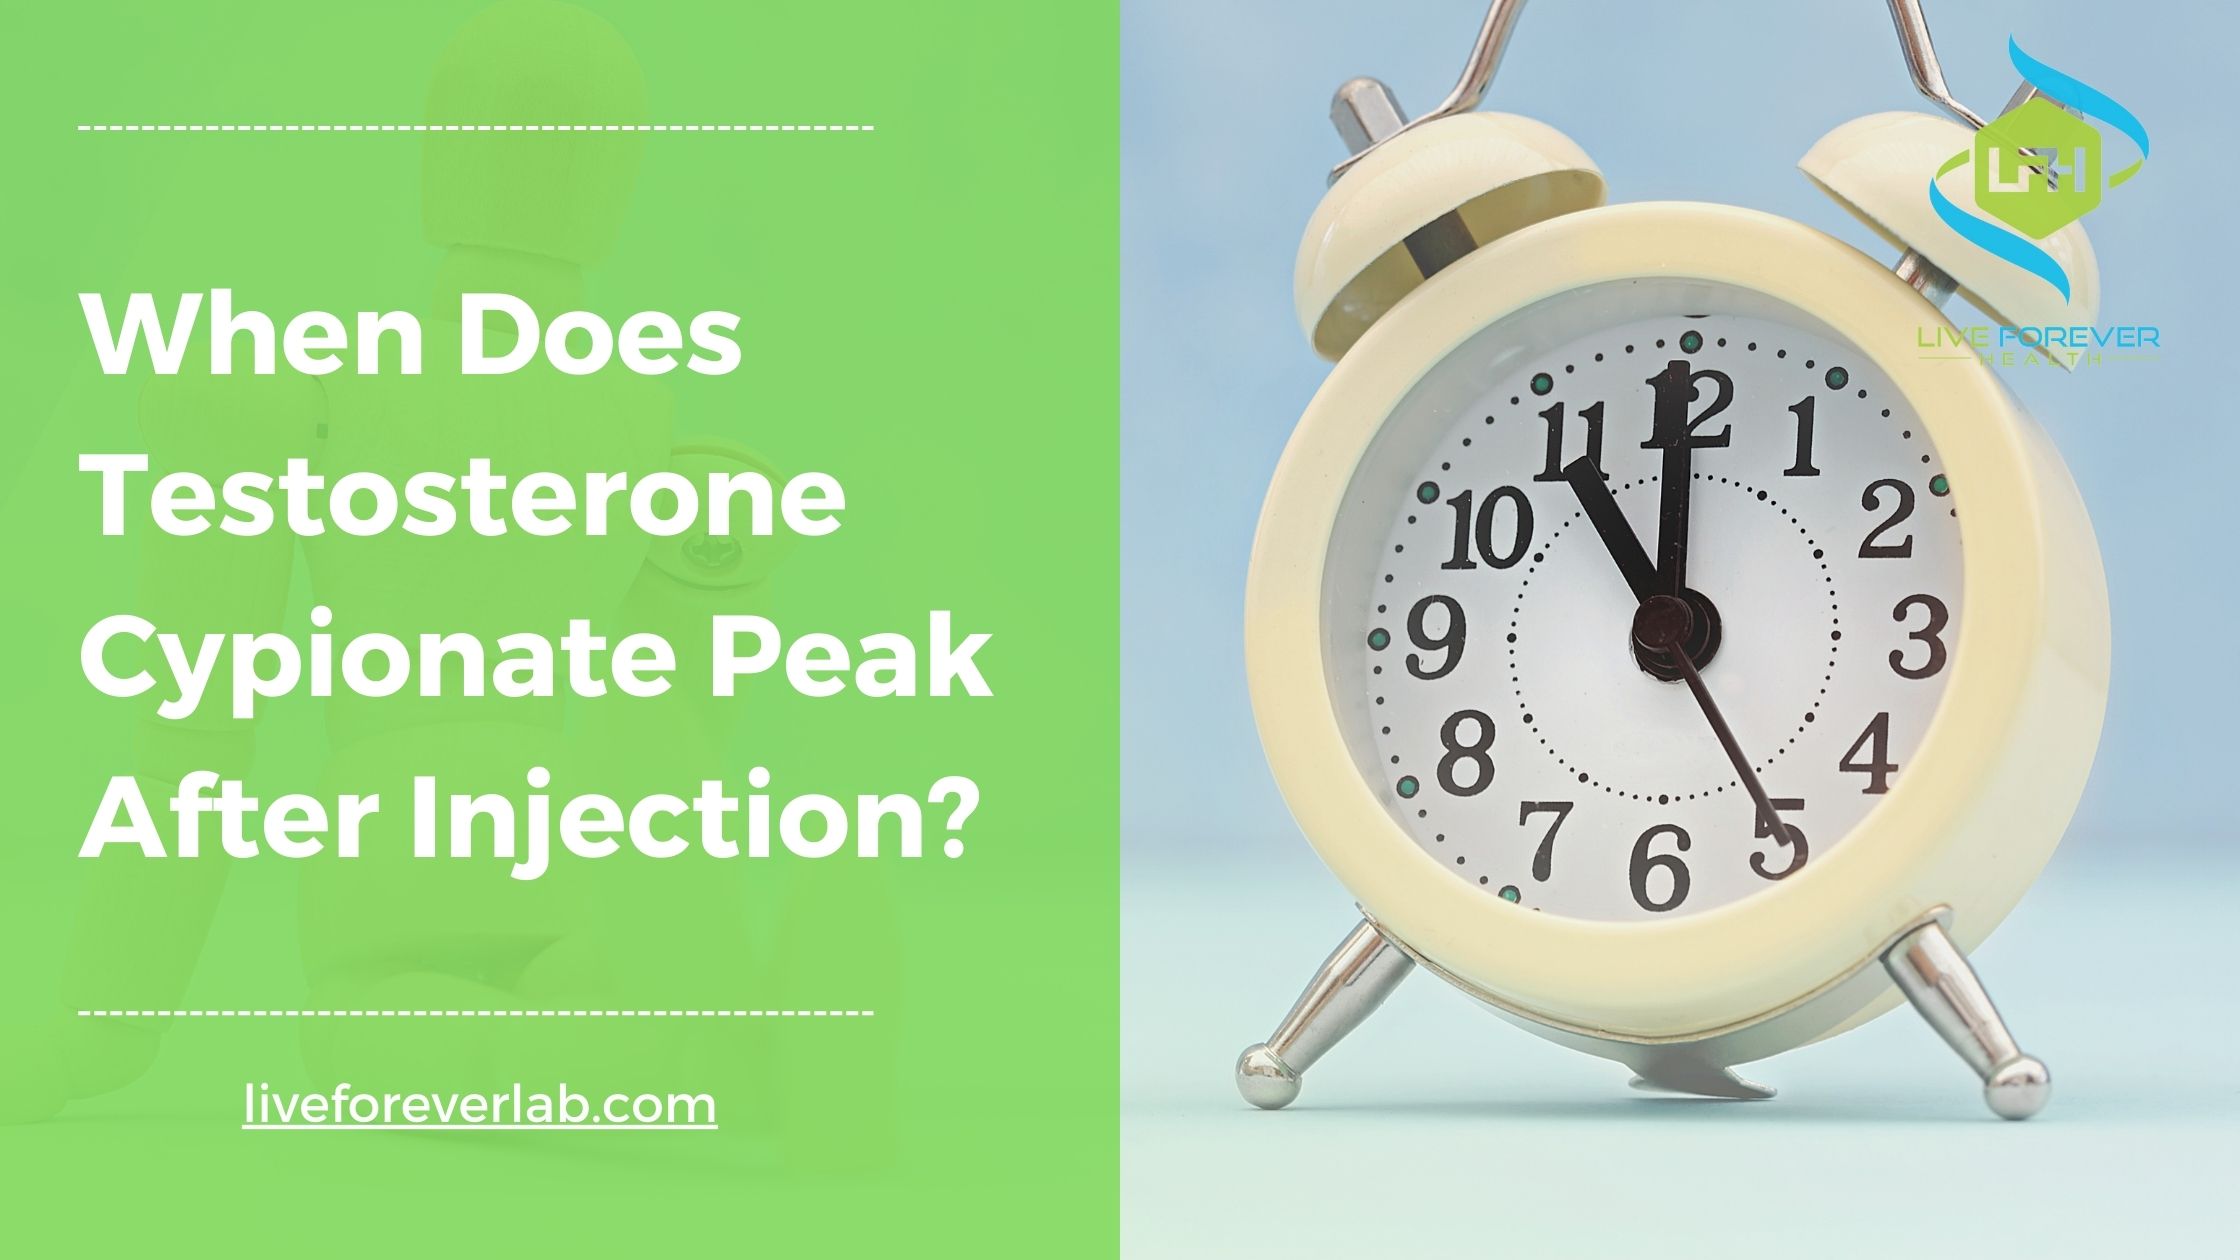 When Does Testosterone Cypionate Peak After Injection